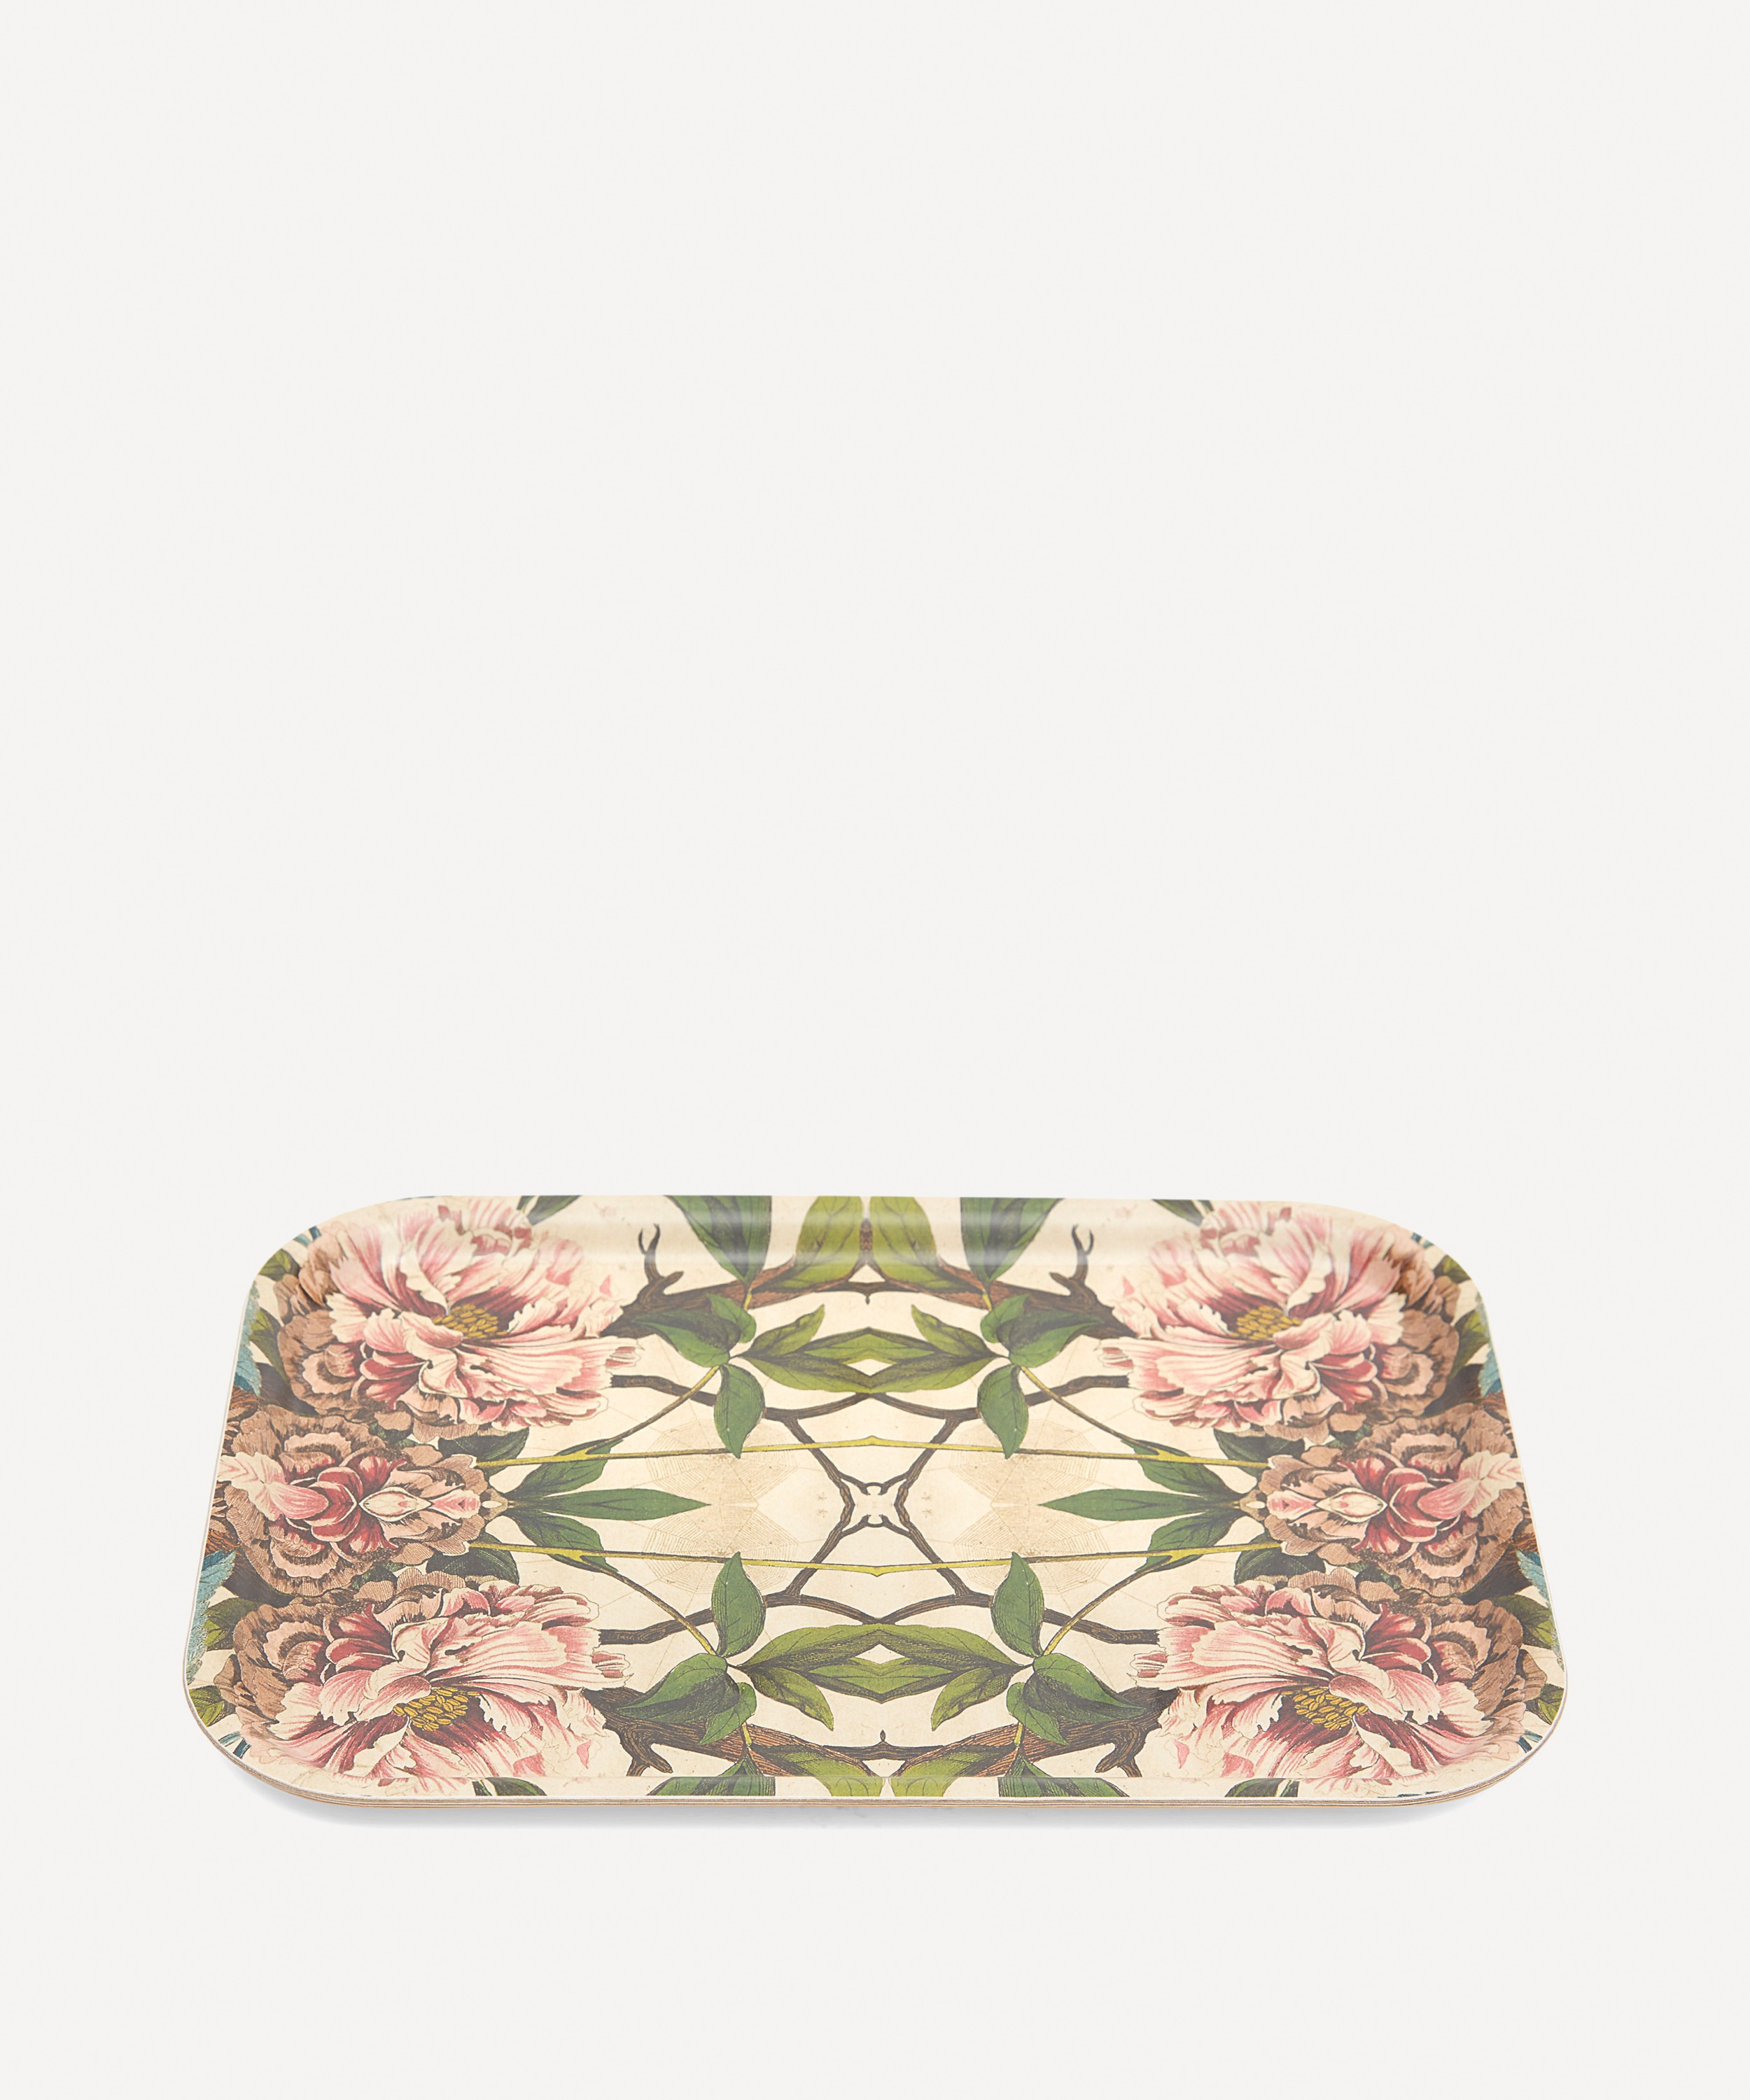 Avenida Home - Peonies Small Tray image number 1